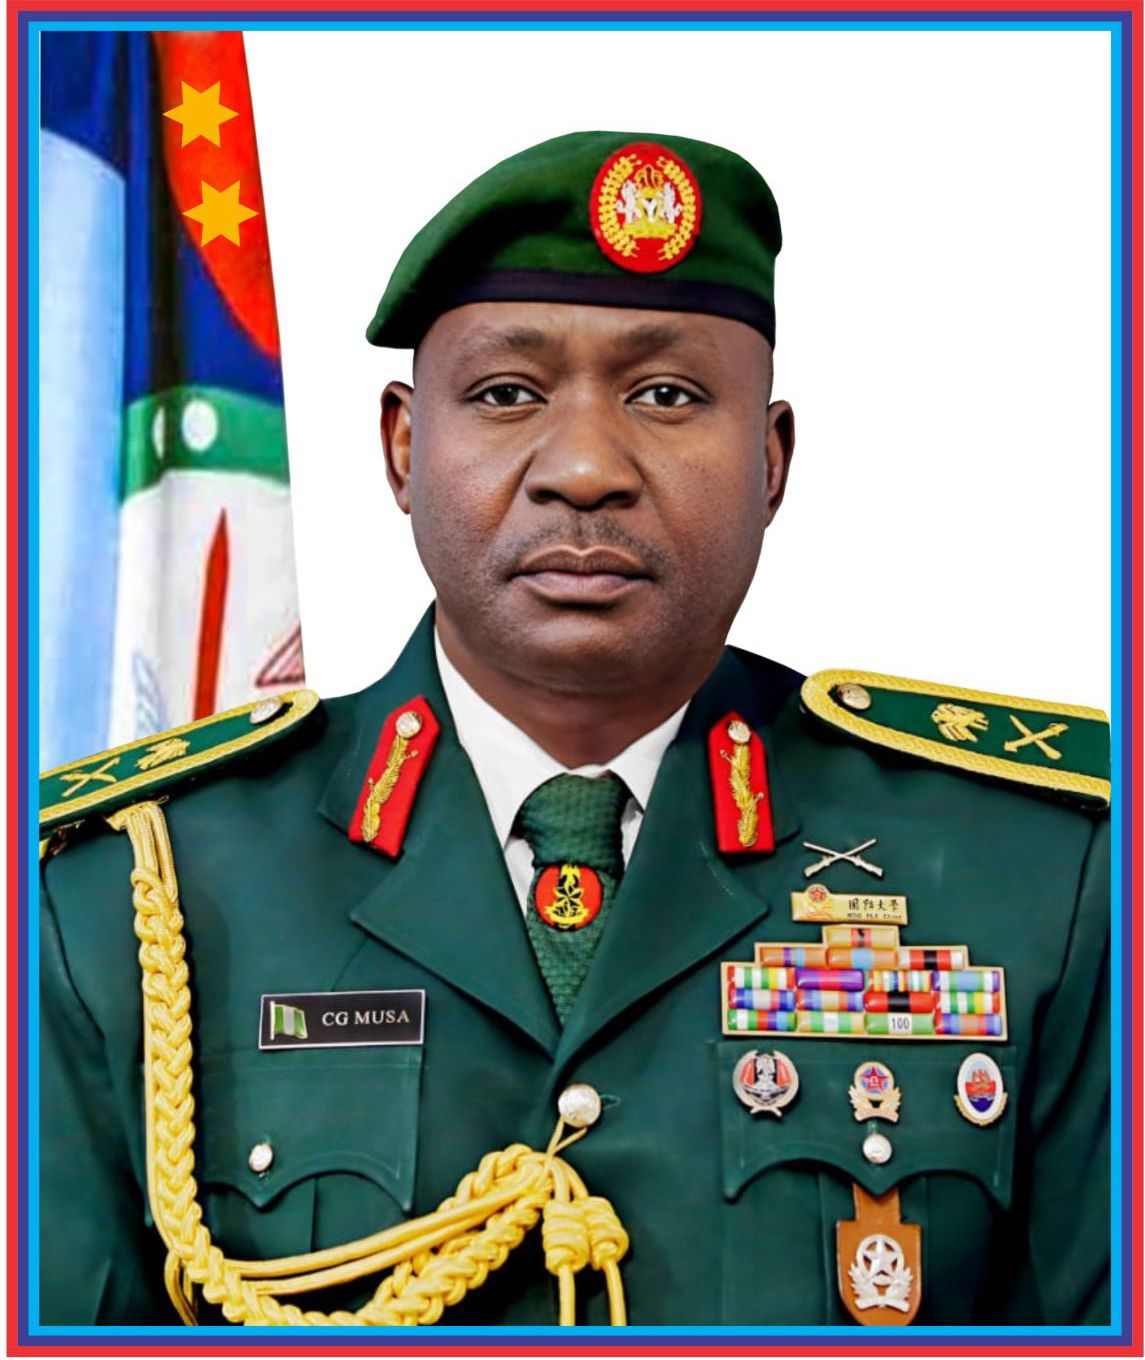 Thanksgiving Service In Honour of the CDS General C.G. Musa